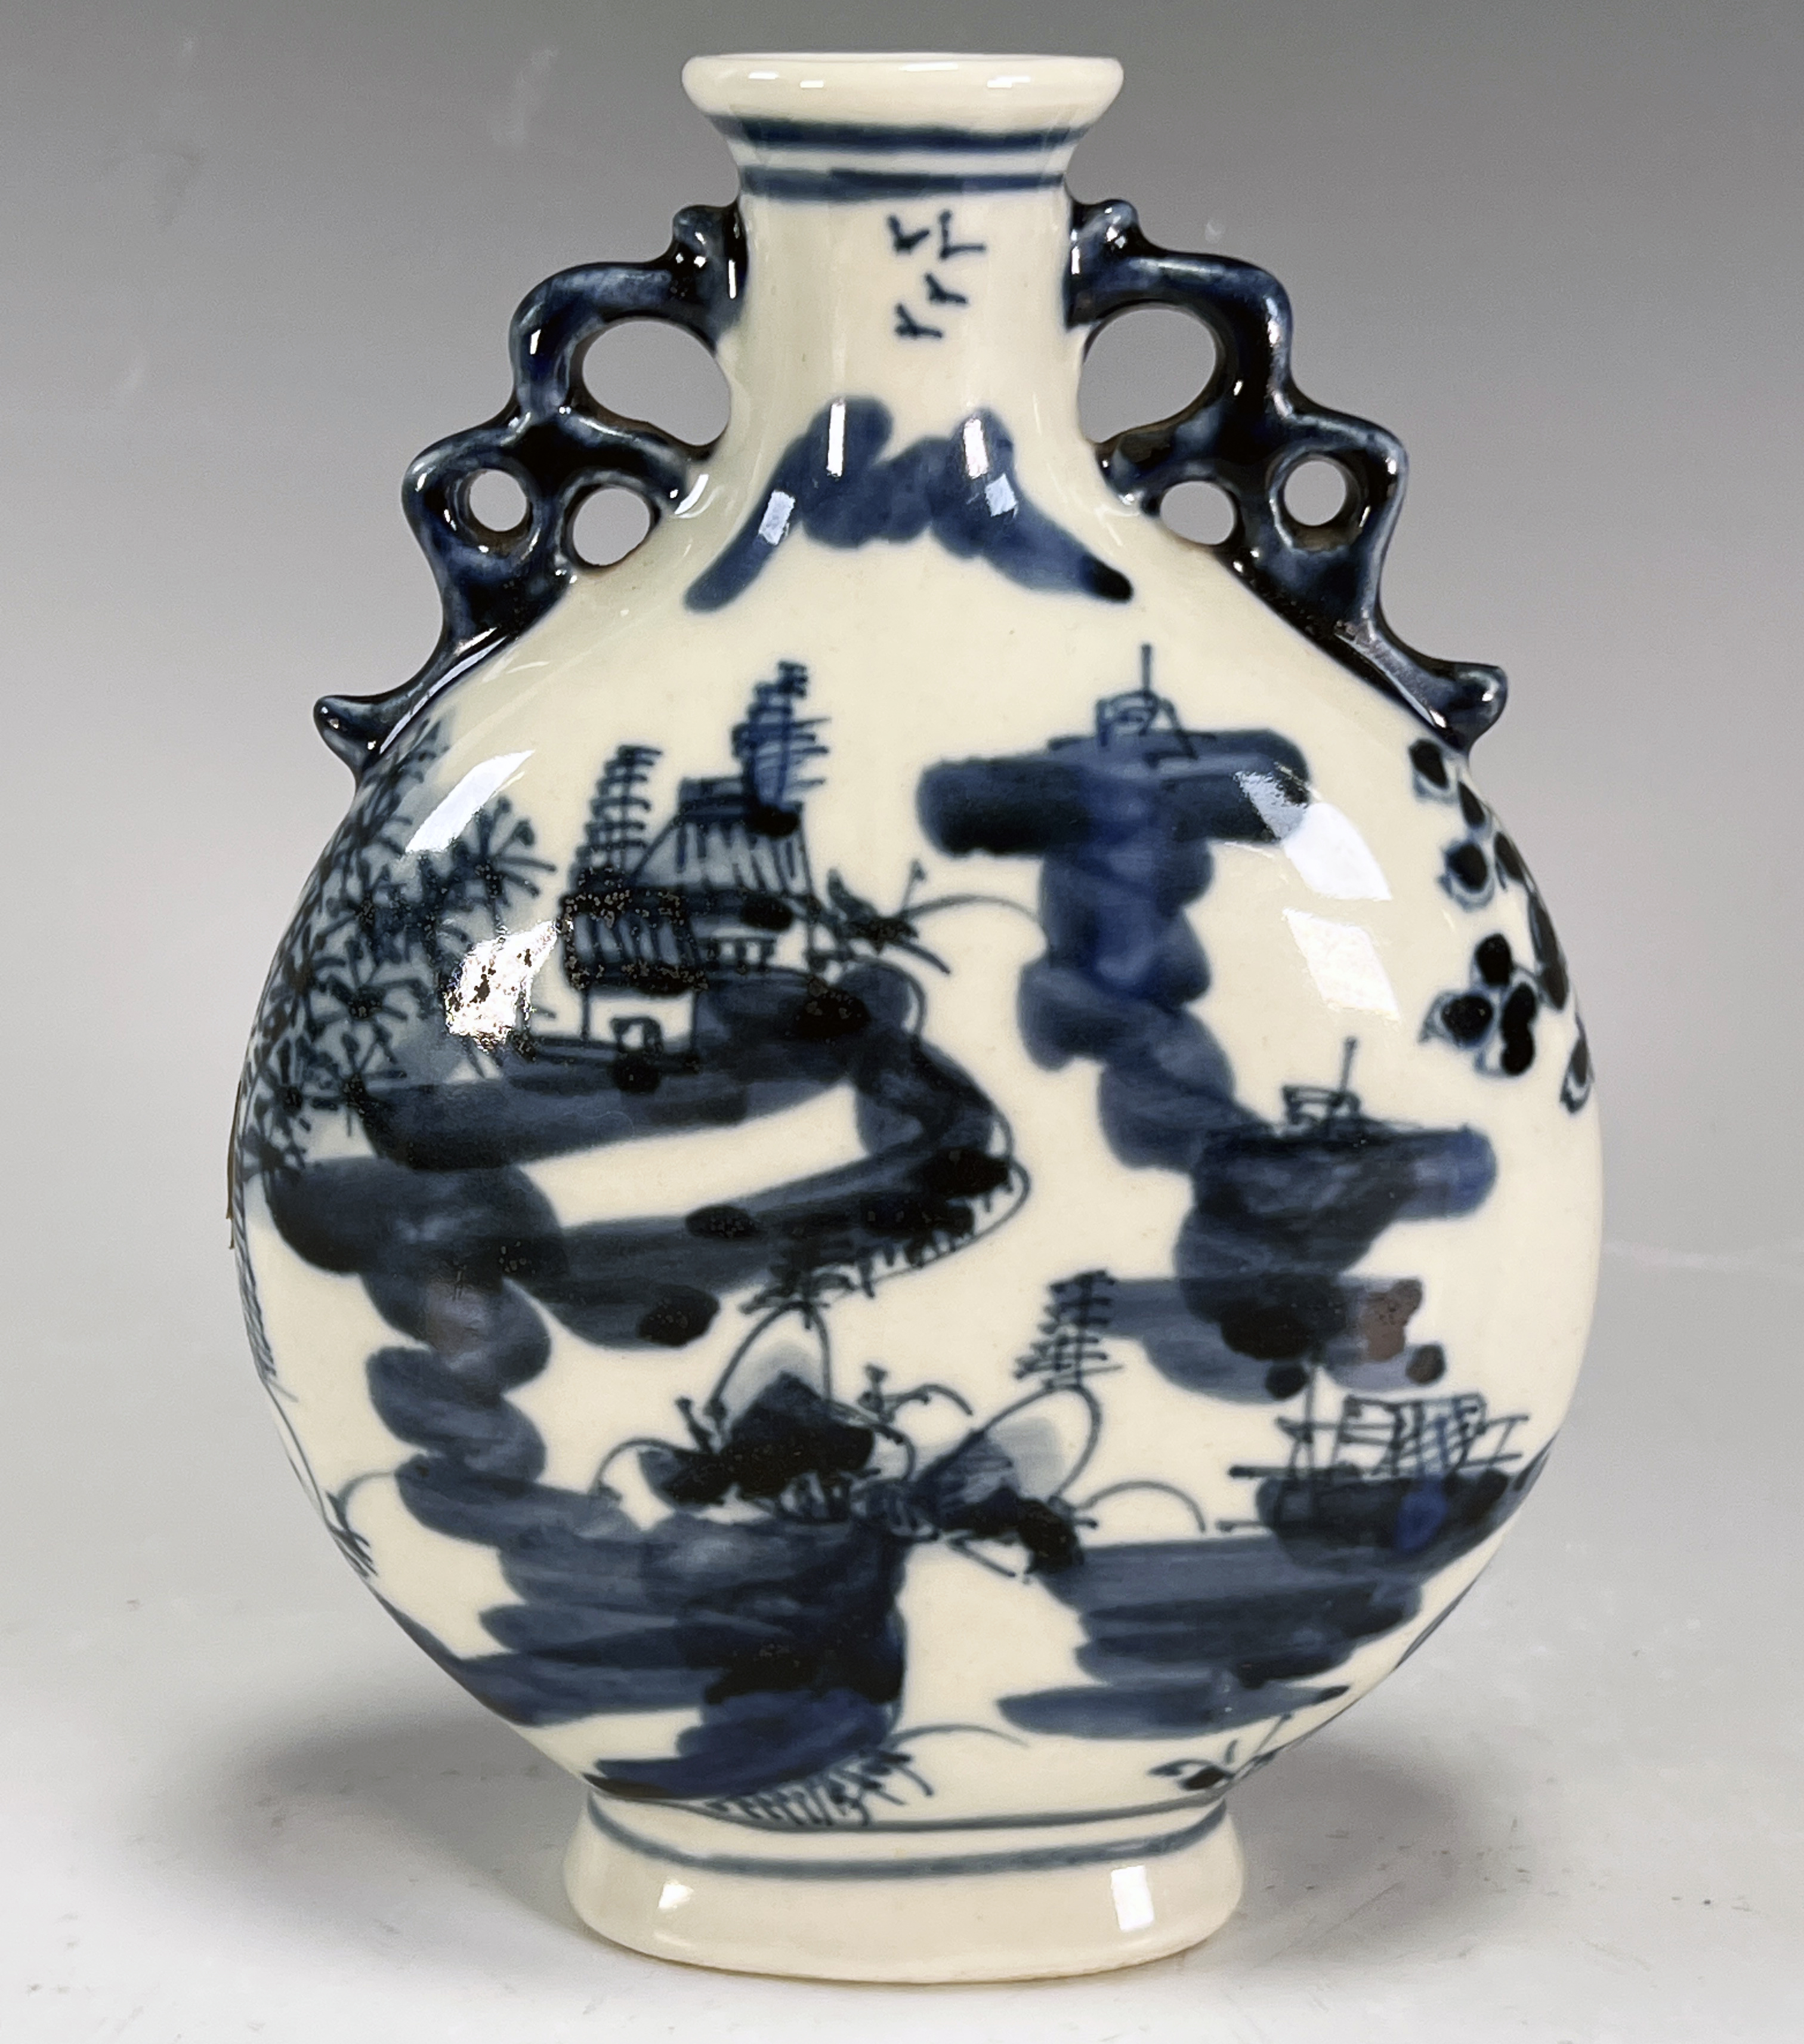 Exquisite Blue & White Chinese Moonflask Vase - 6.5 Inches image 1